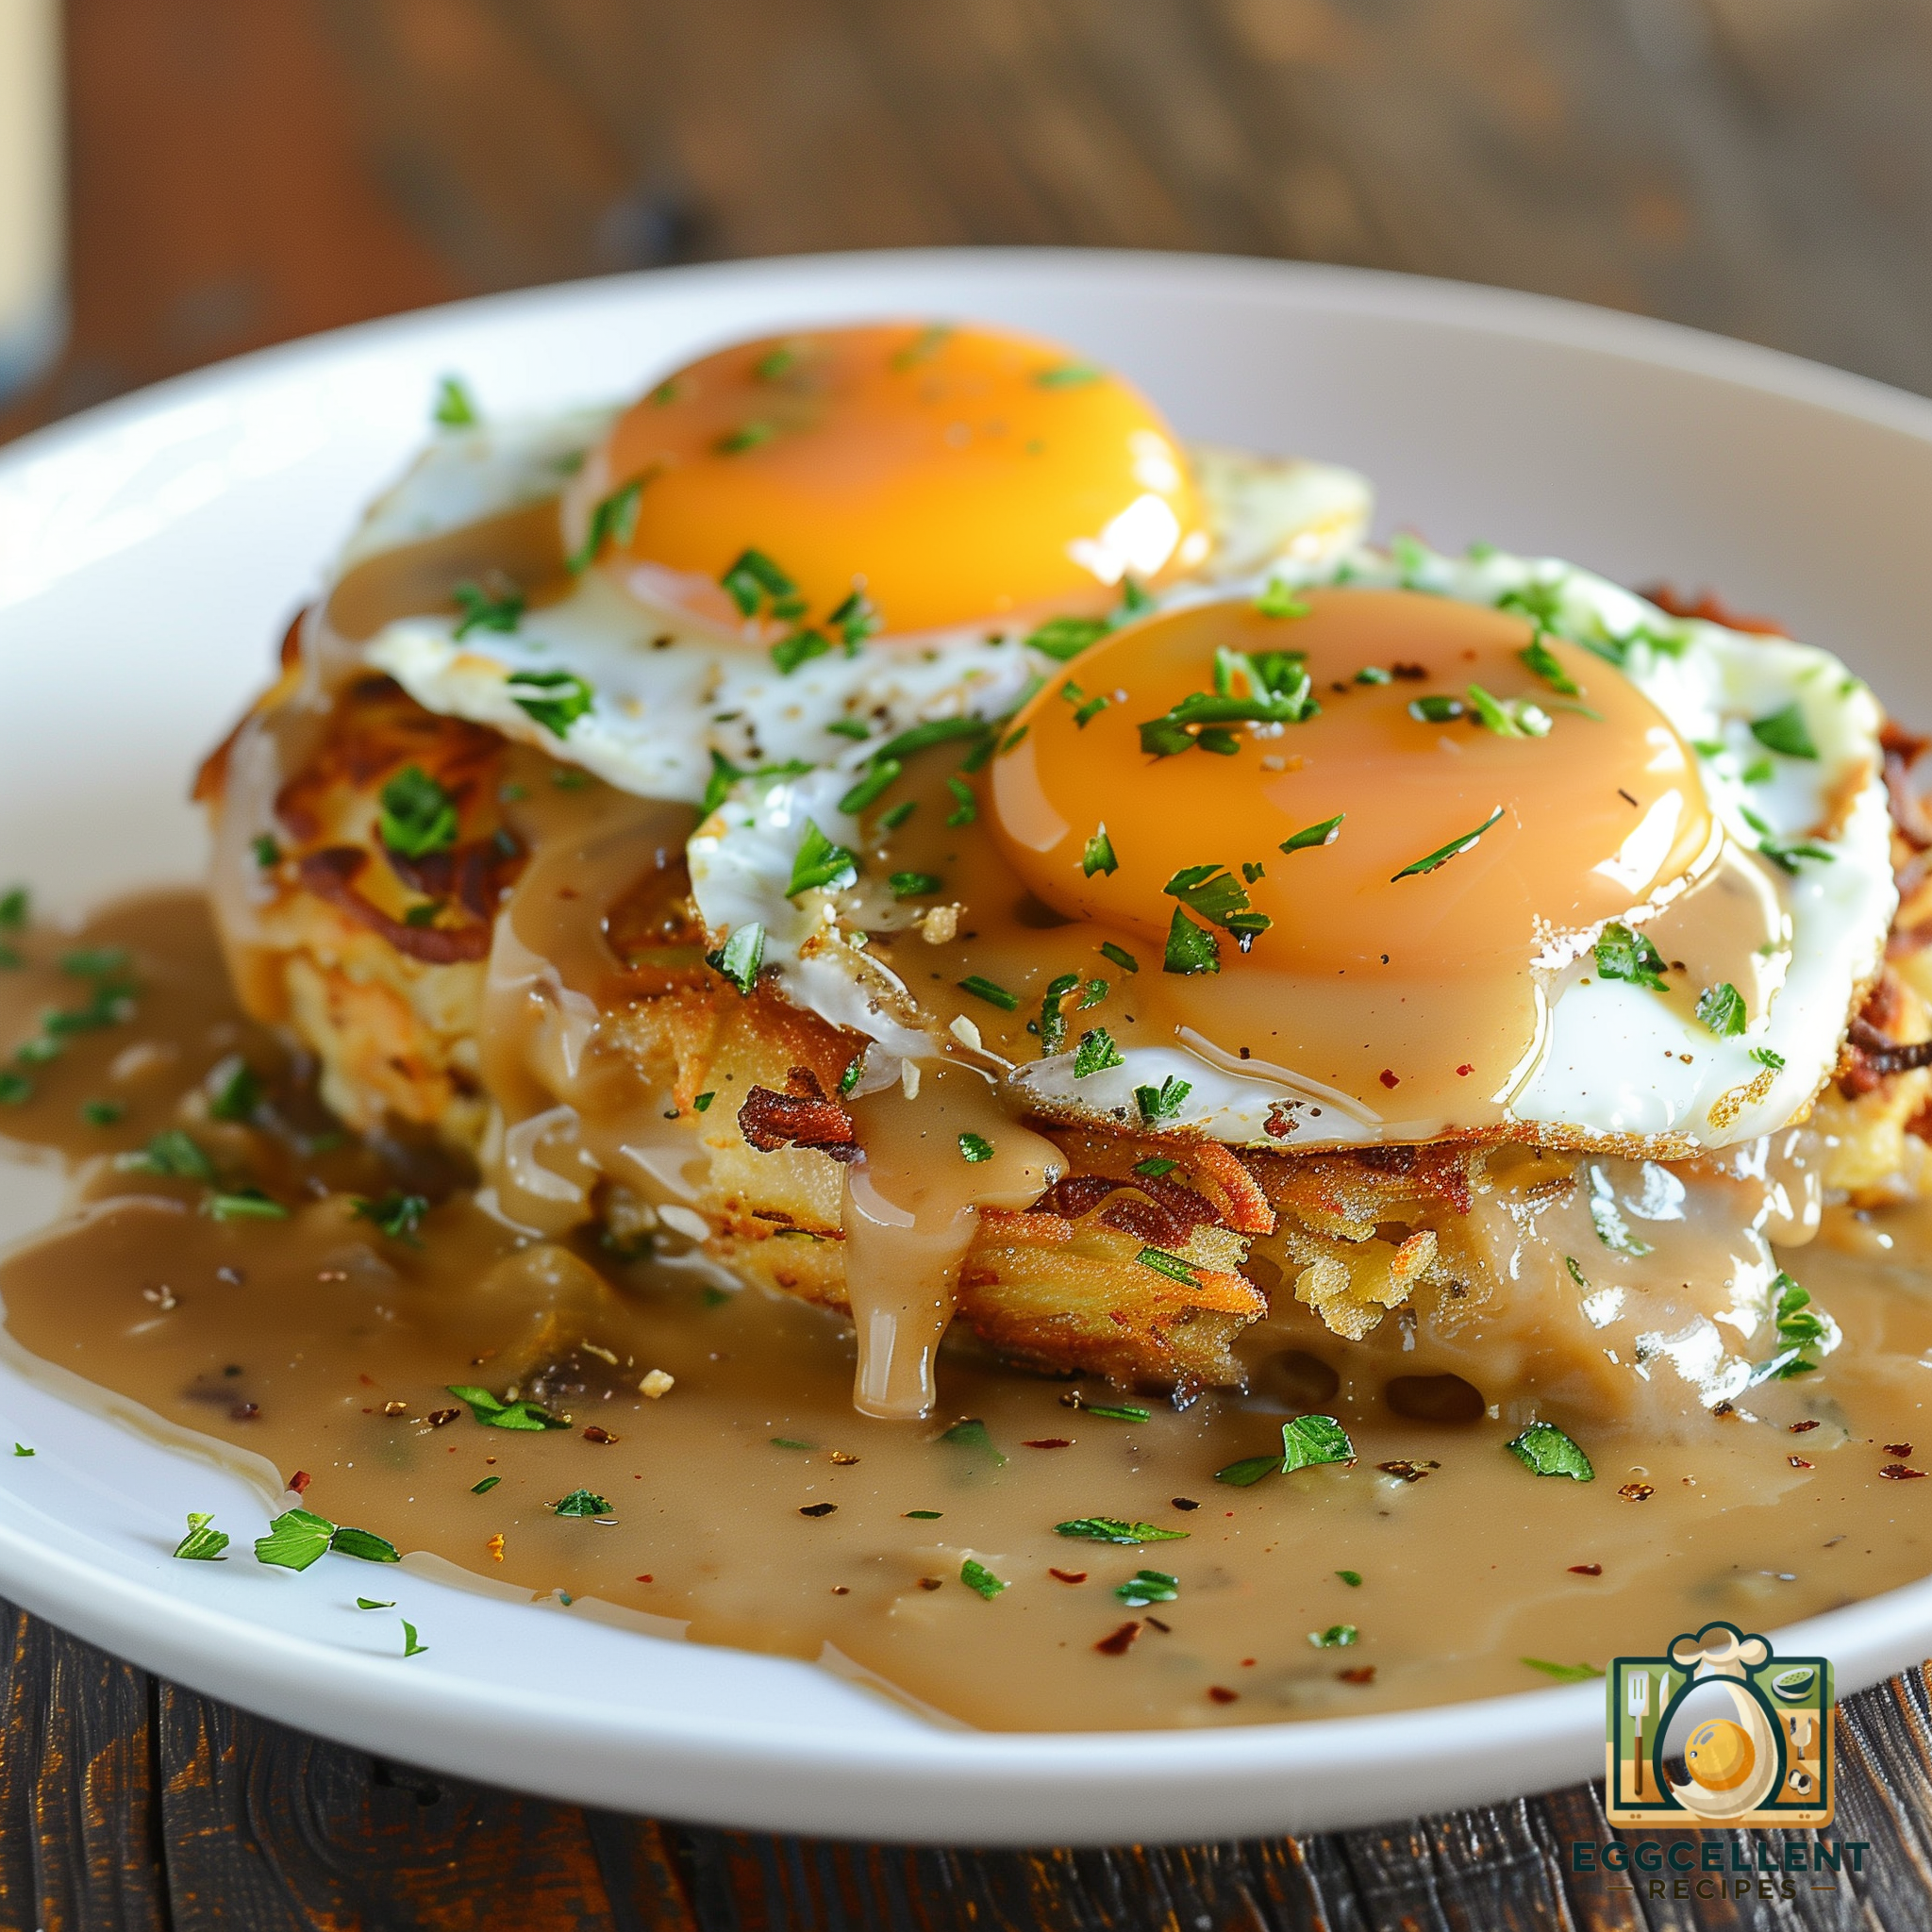 Crispy Hash Browns with Over-Easy Eggs and Gravy Recipe